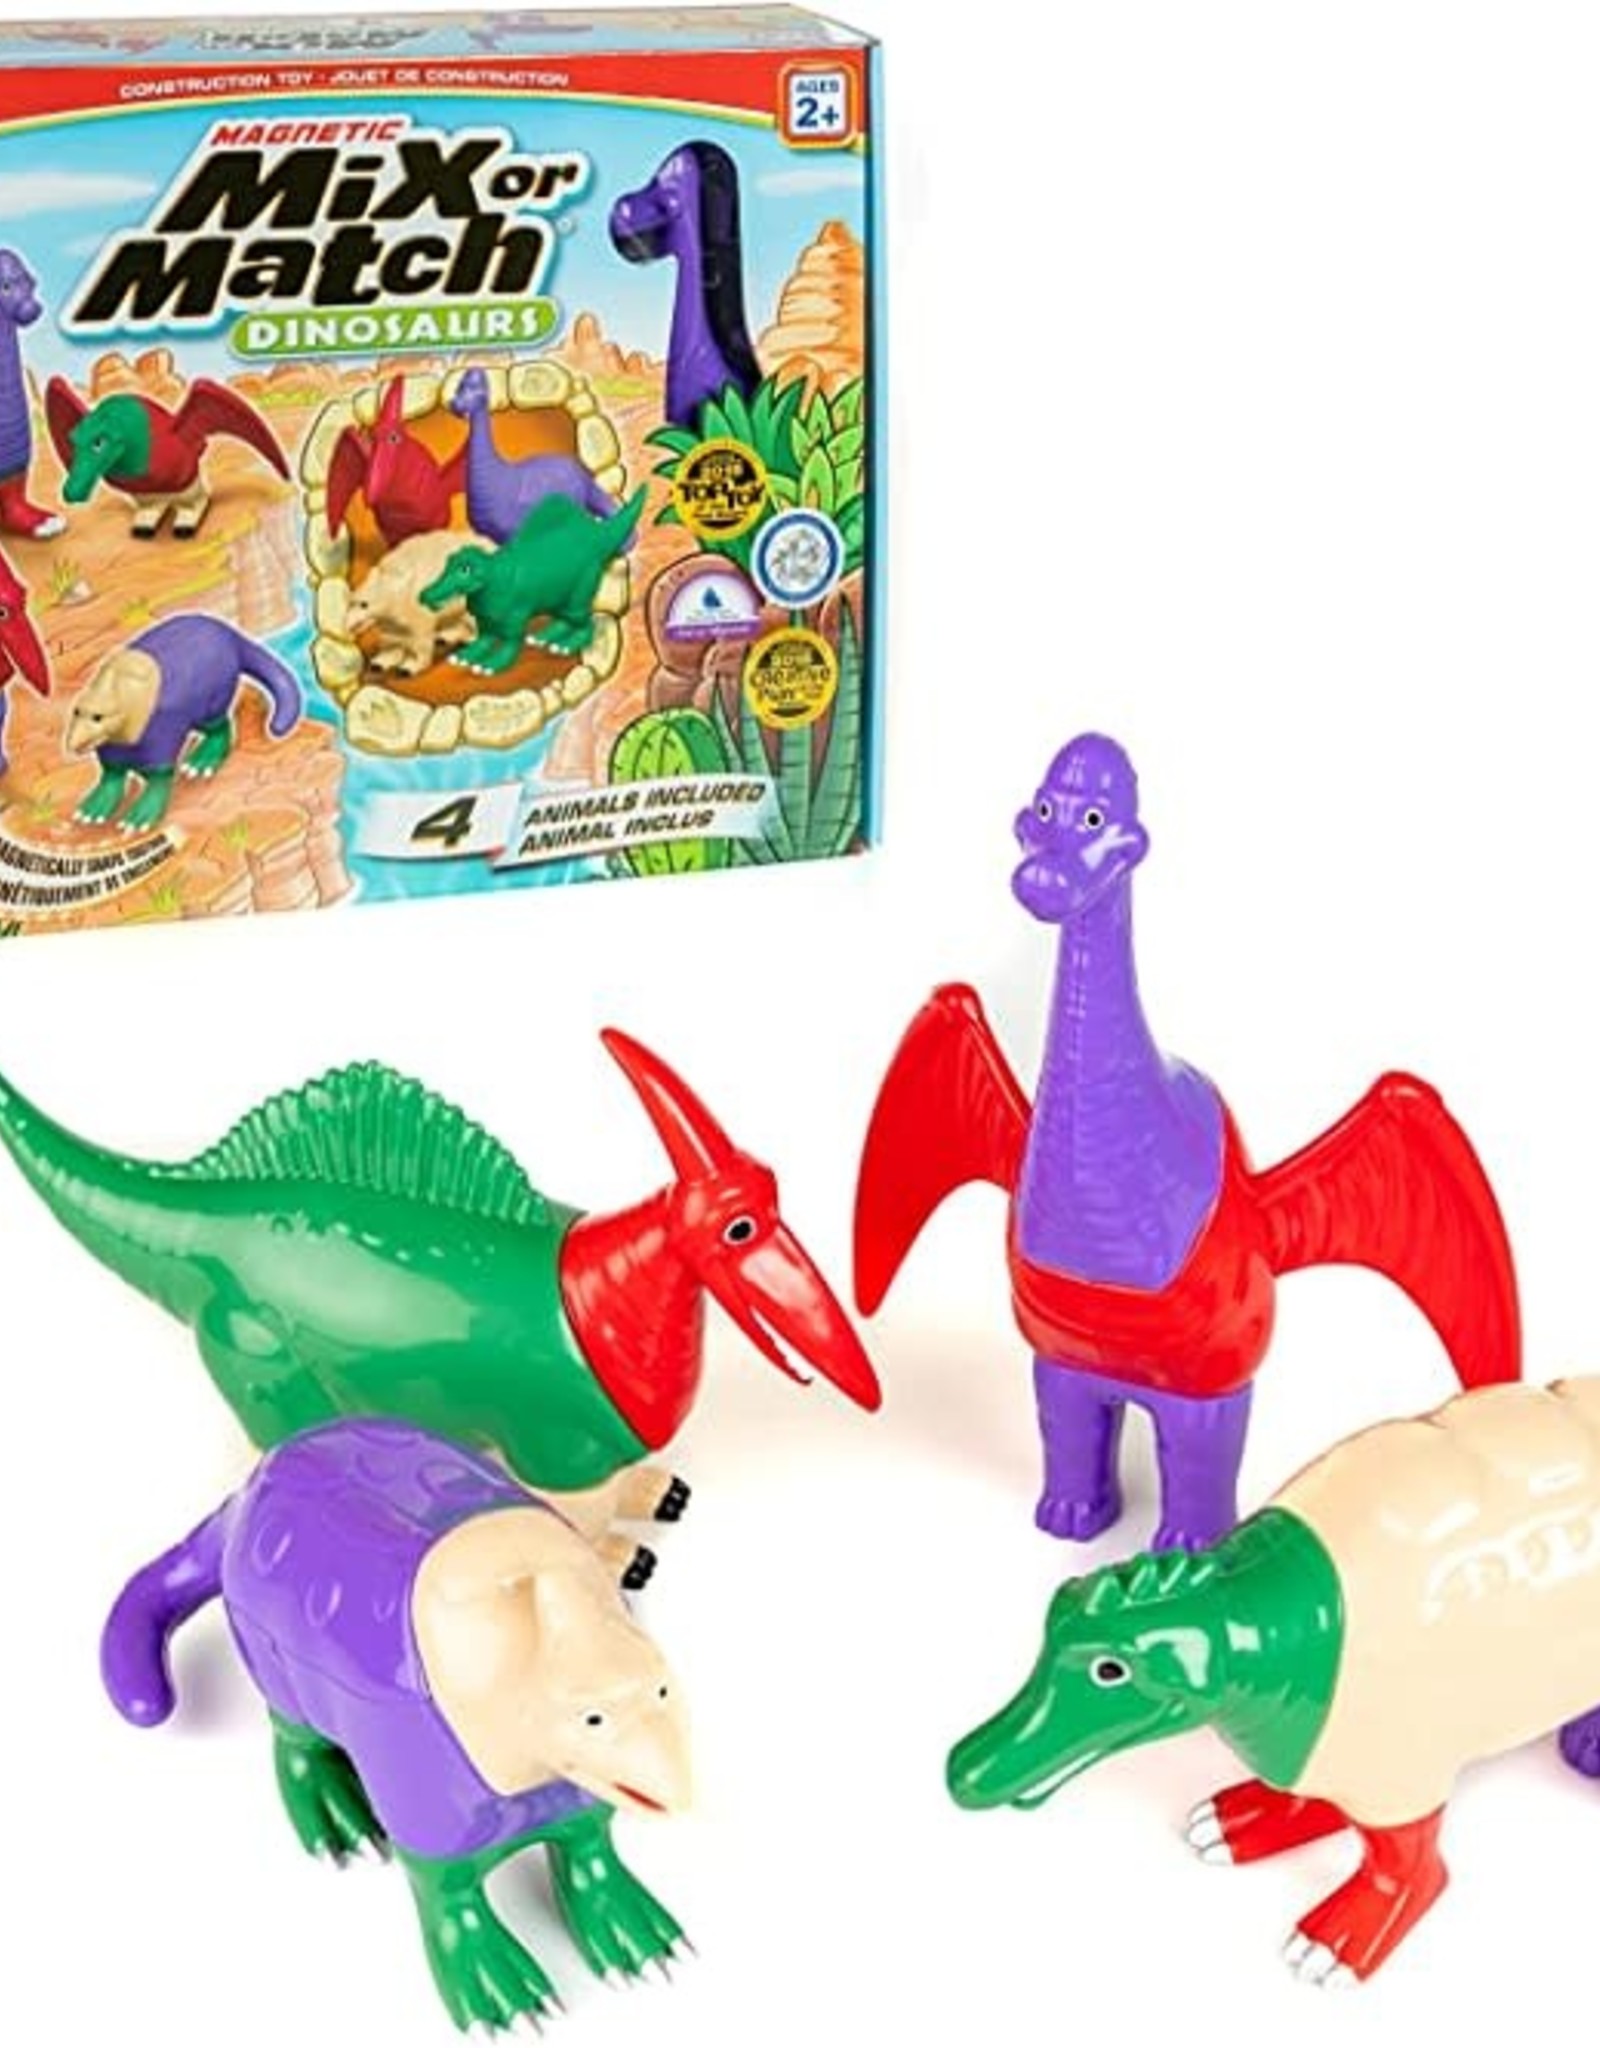 Popular Playthings Mix or Match Dinosaurs 2